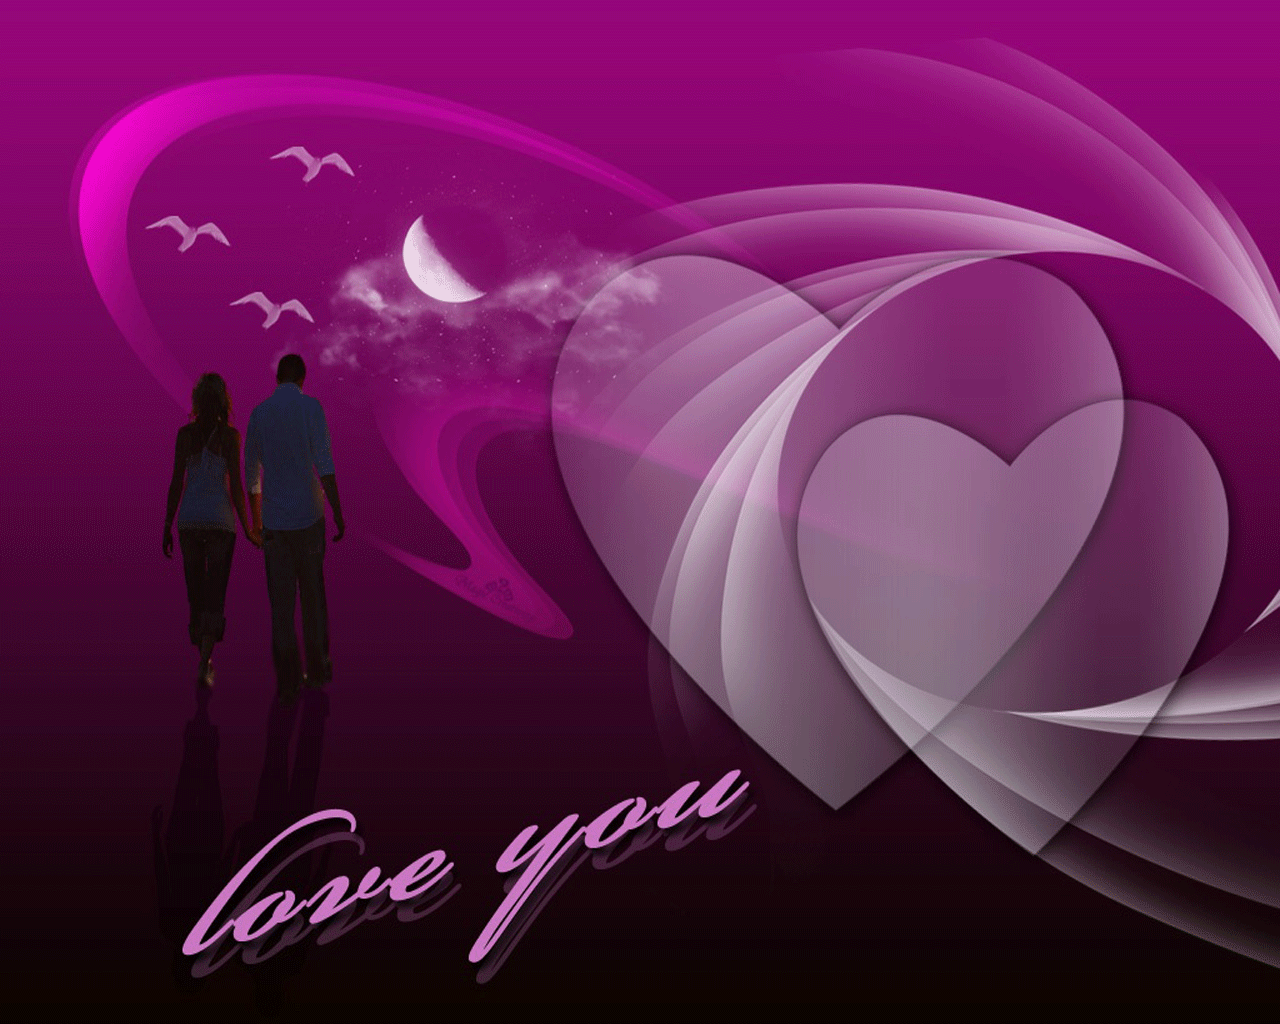 Free Download Wallpaper Love Quotes Wallpaper On Zedge 1280x1024 For Your Desktop Mobile Tablet Explore 76 Love You Wallpapers Free Free Valentine Wallpaper Love Backgrounds Wallpaper Free Love Wallpaper Pictures